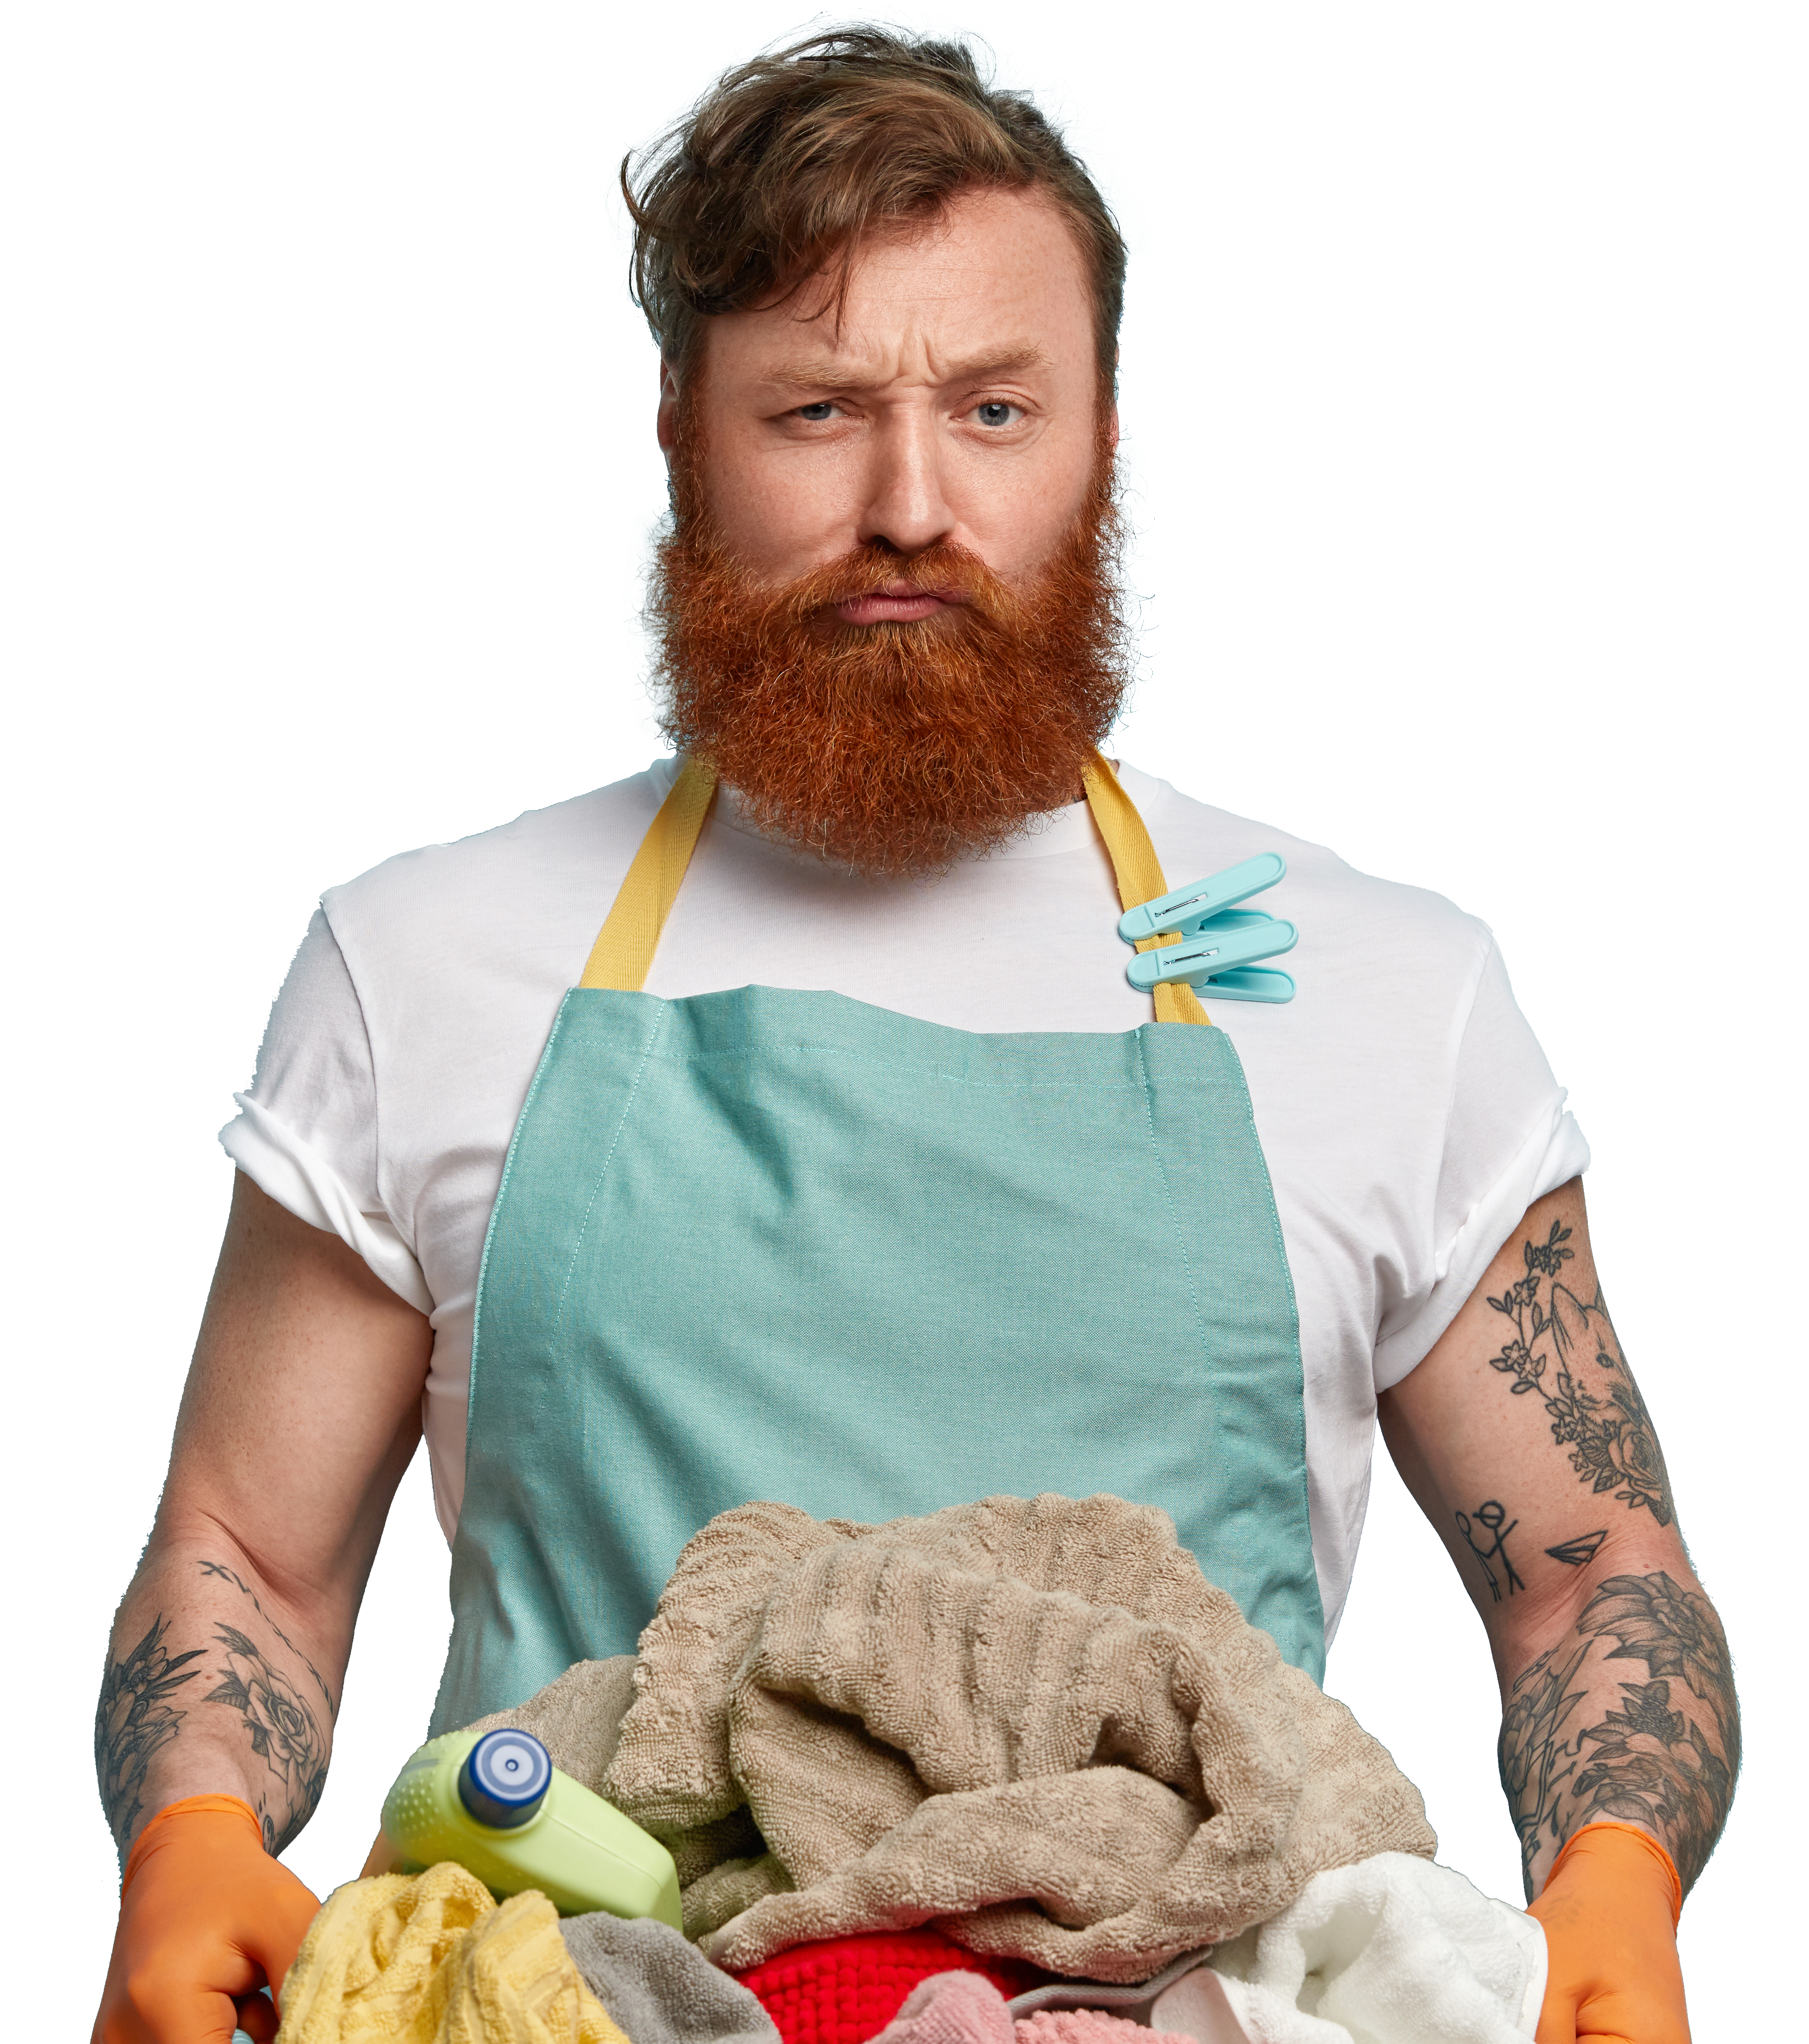 Compare your Super - Red Hair Laundry Man